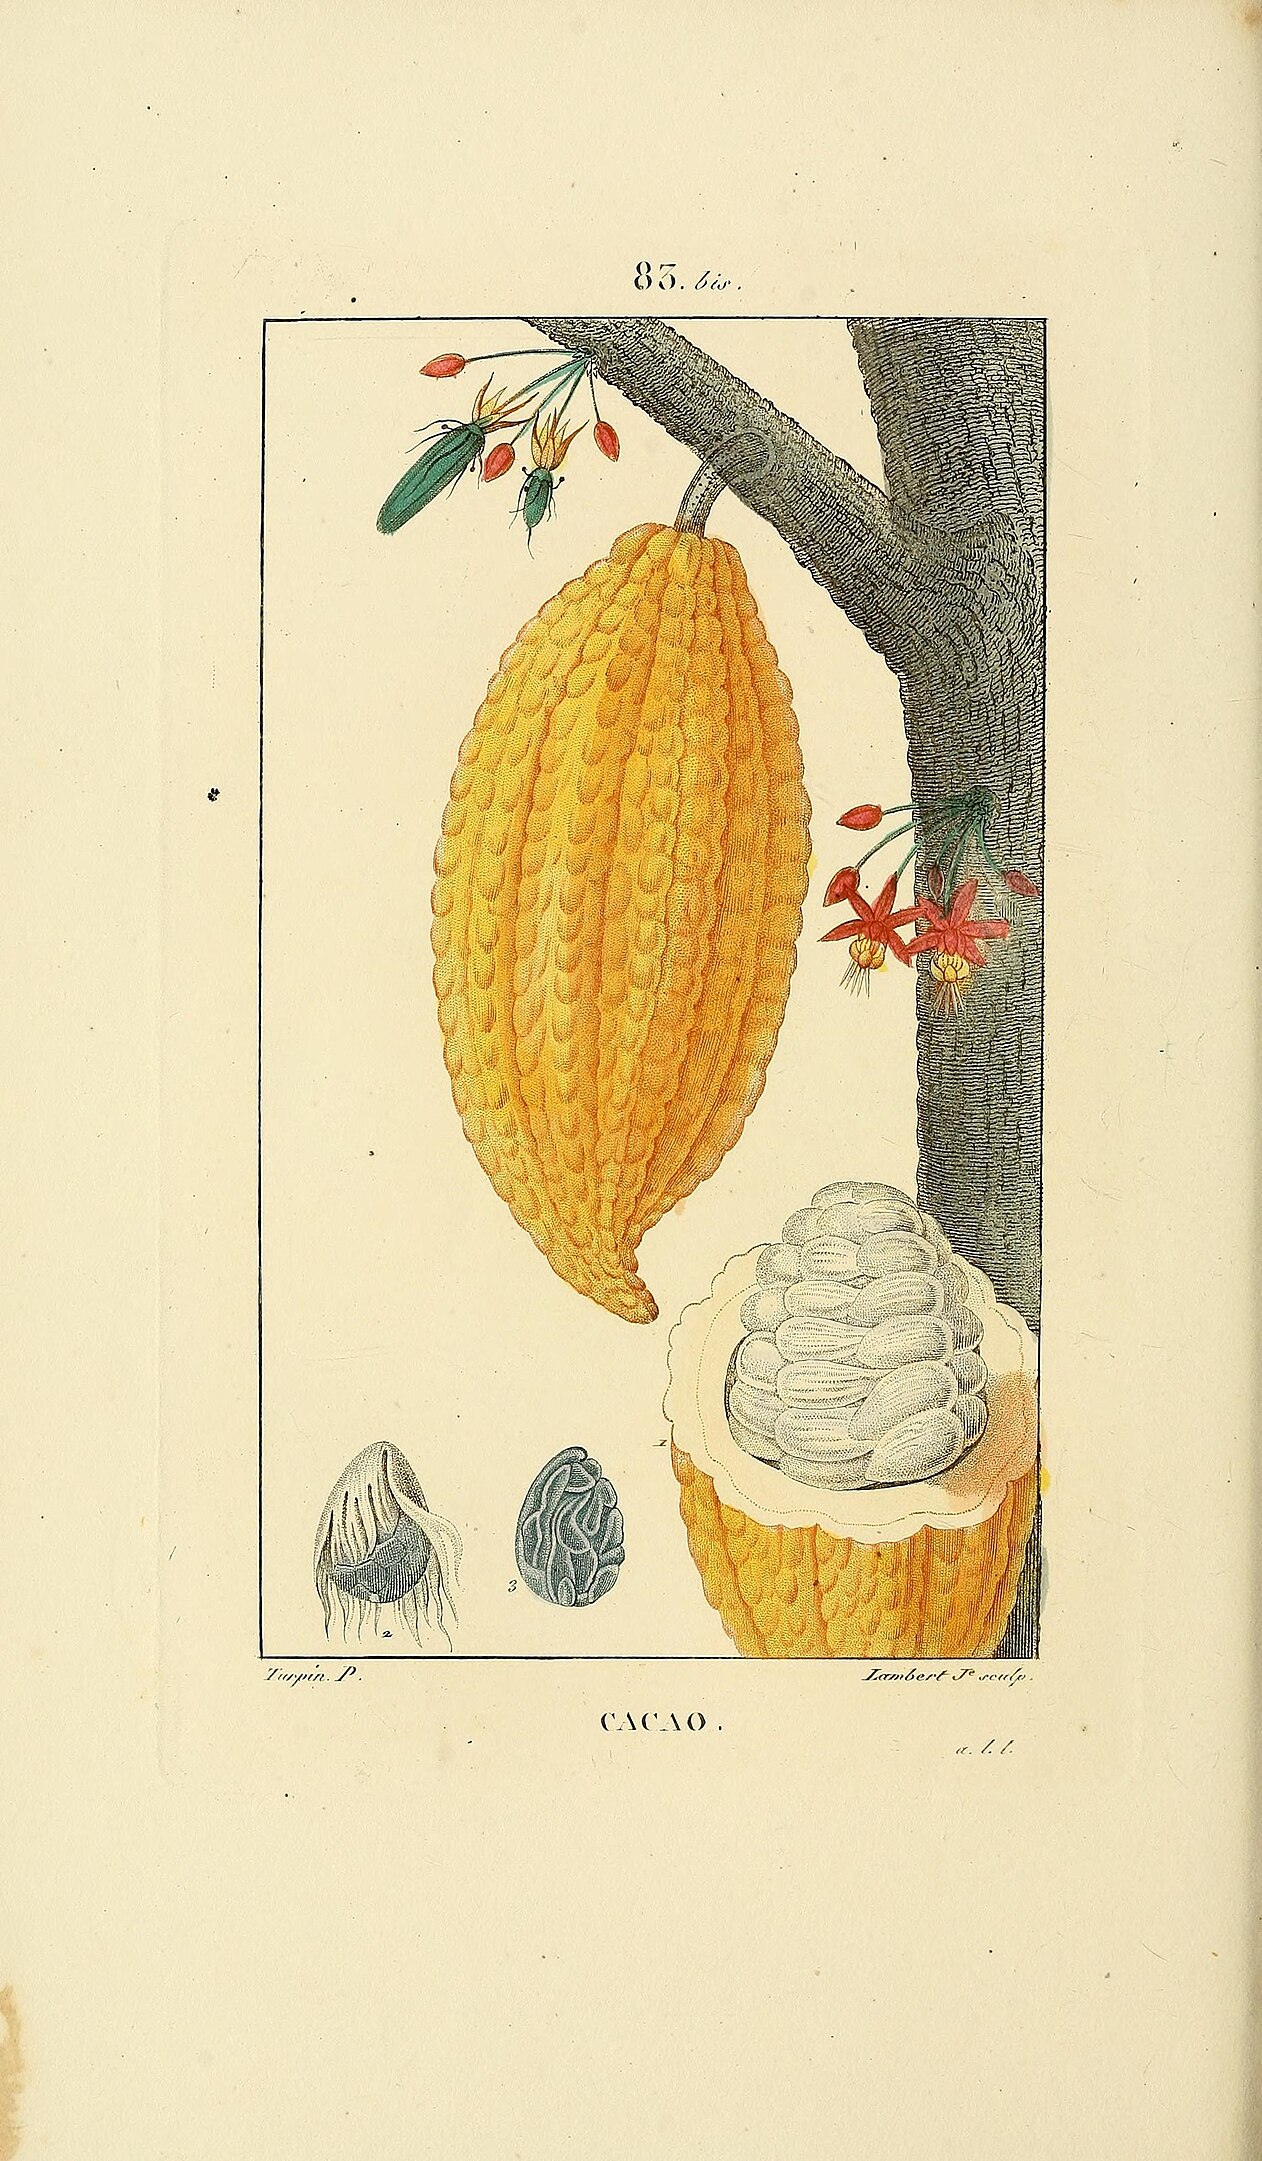 An illustration of a cacao bean hanging from a tree branch